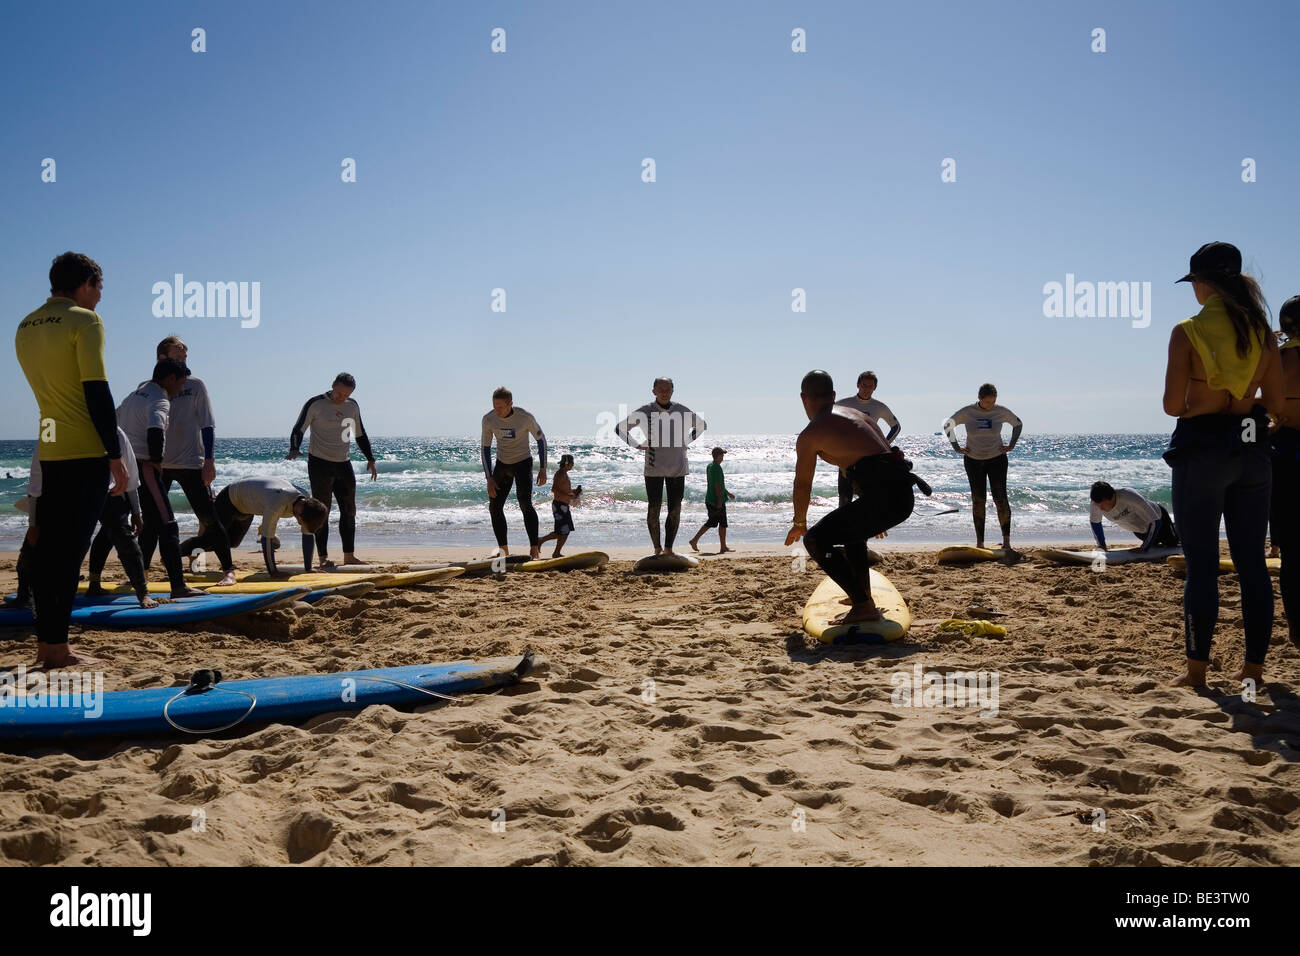 Learning to surf at Surfschool on the sands of Manly Beach. Sydney, New South Wales, AUSTRALIA Stock Photo